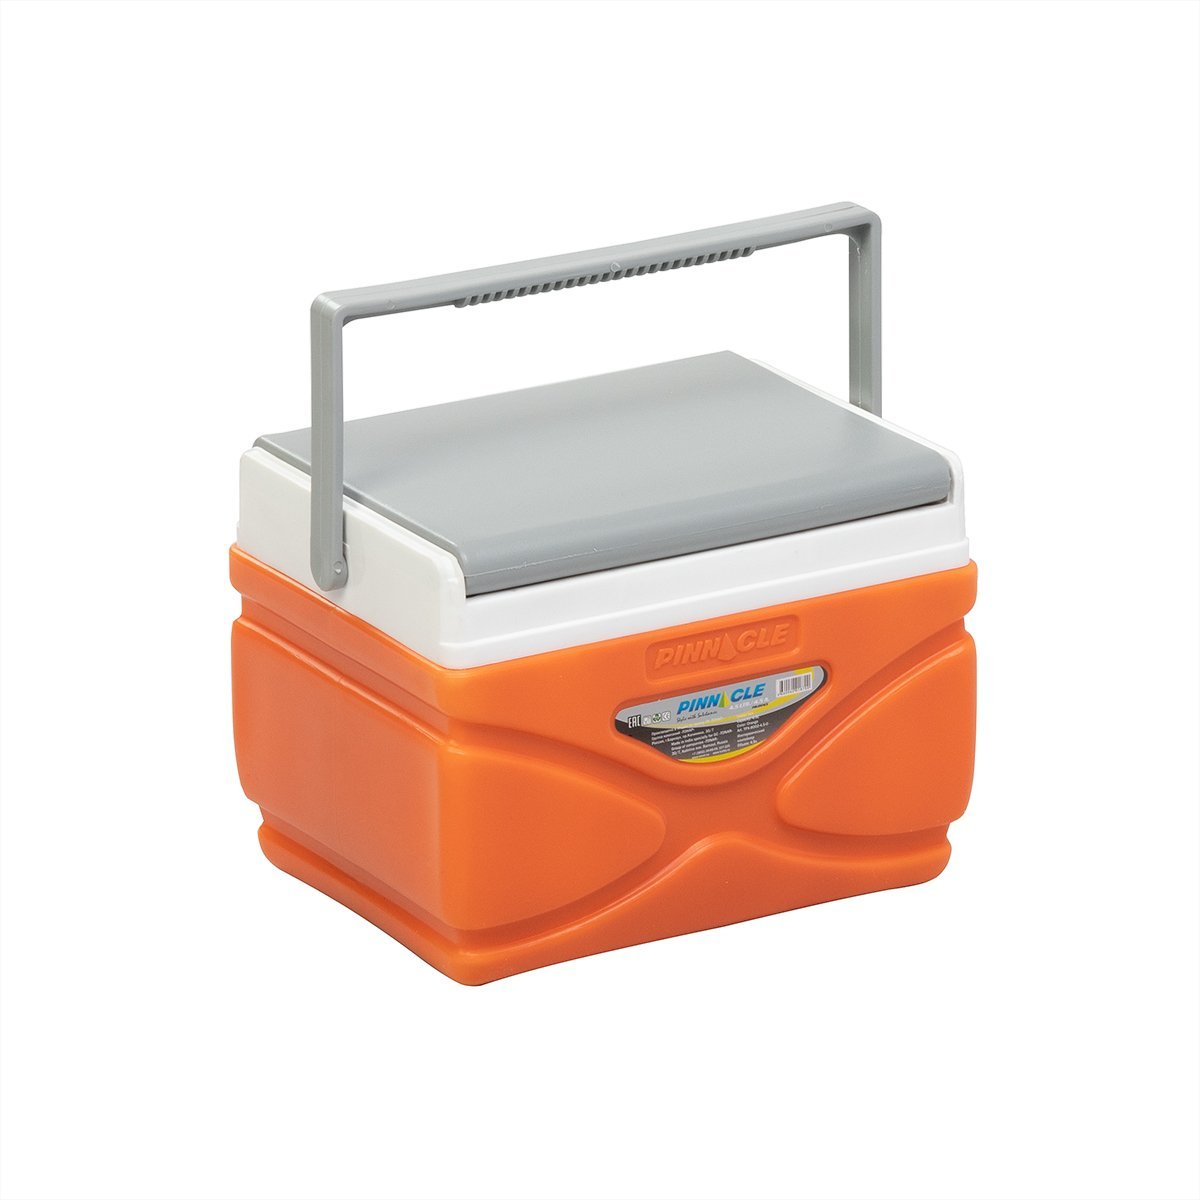 Prudence Portable Hard-Sided Ice Chest for Camping, 4 qt, with handle, orange color